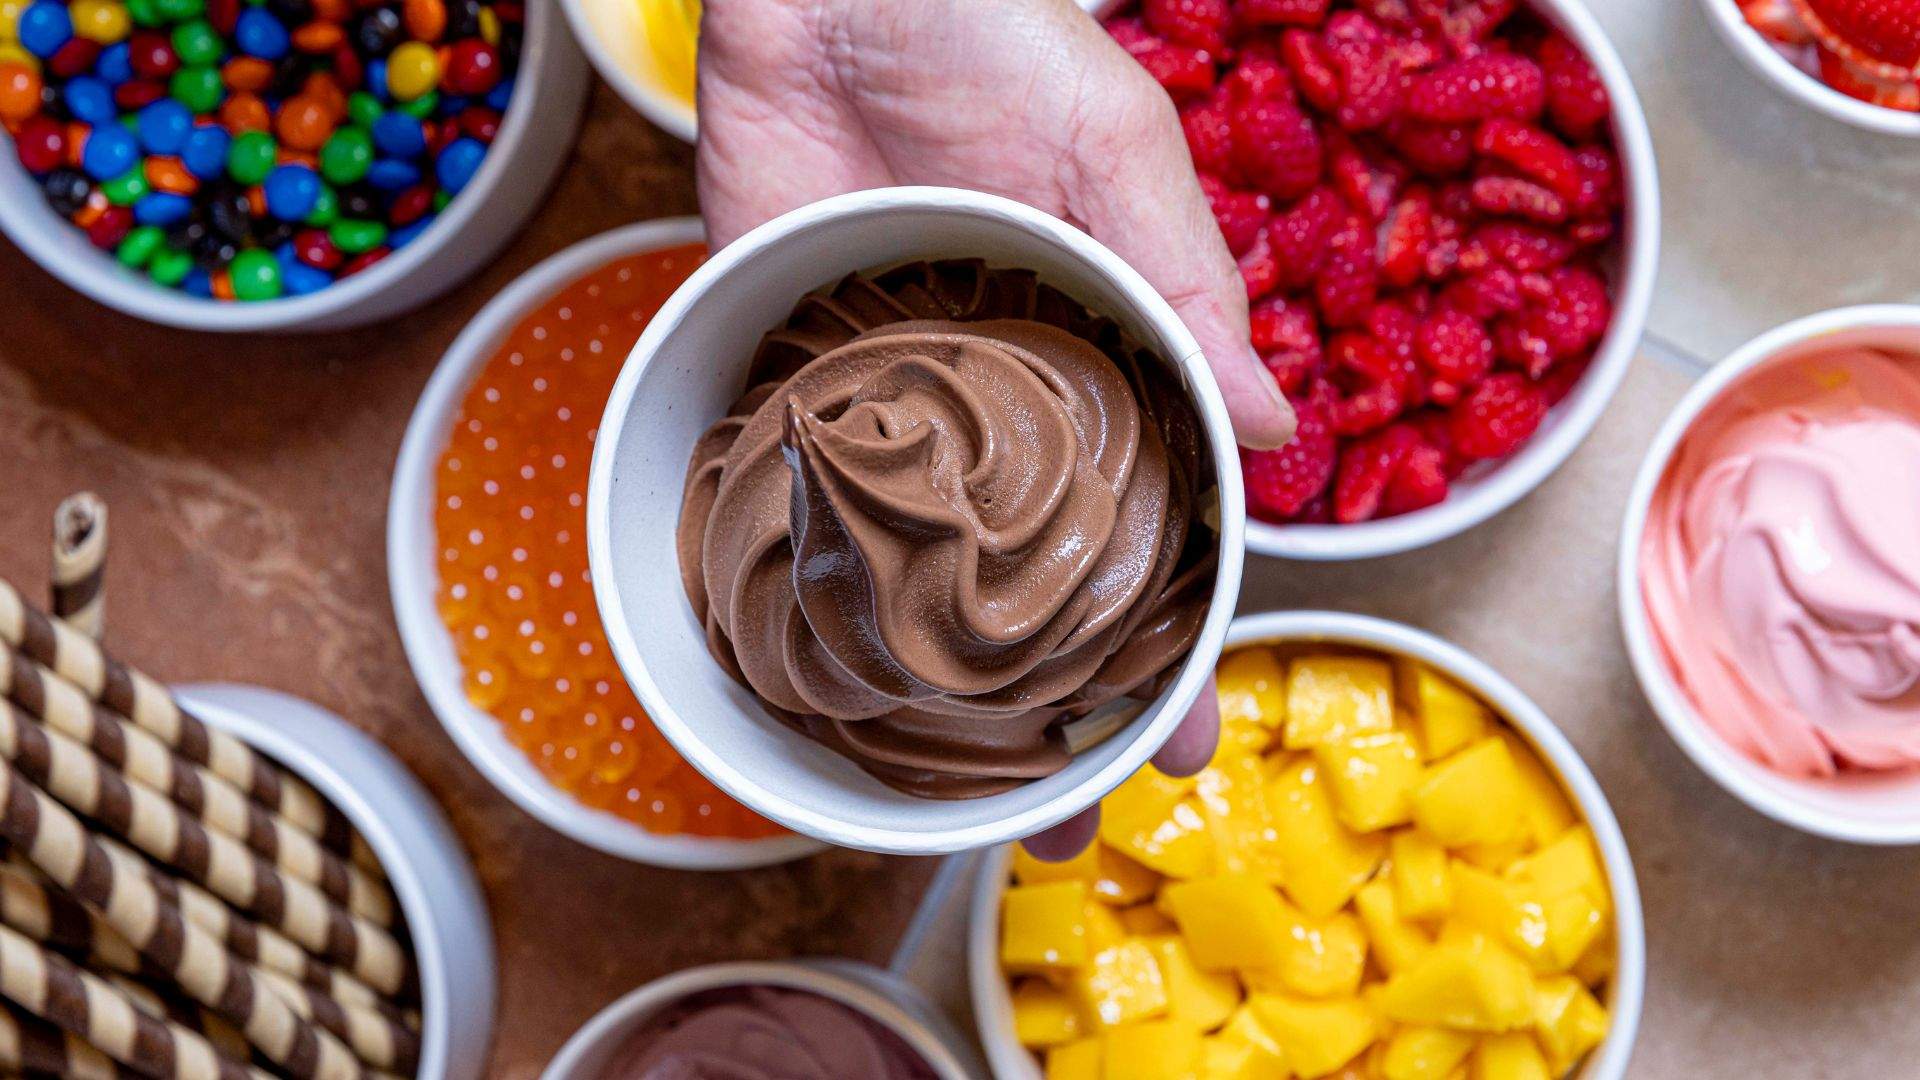 Froyo Is Back: This Frozen Yoghurt Atelier Is Serving up a Revamped Take on the Sweet Treat